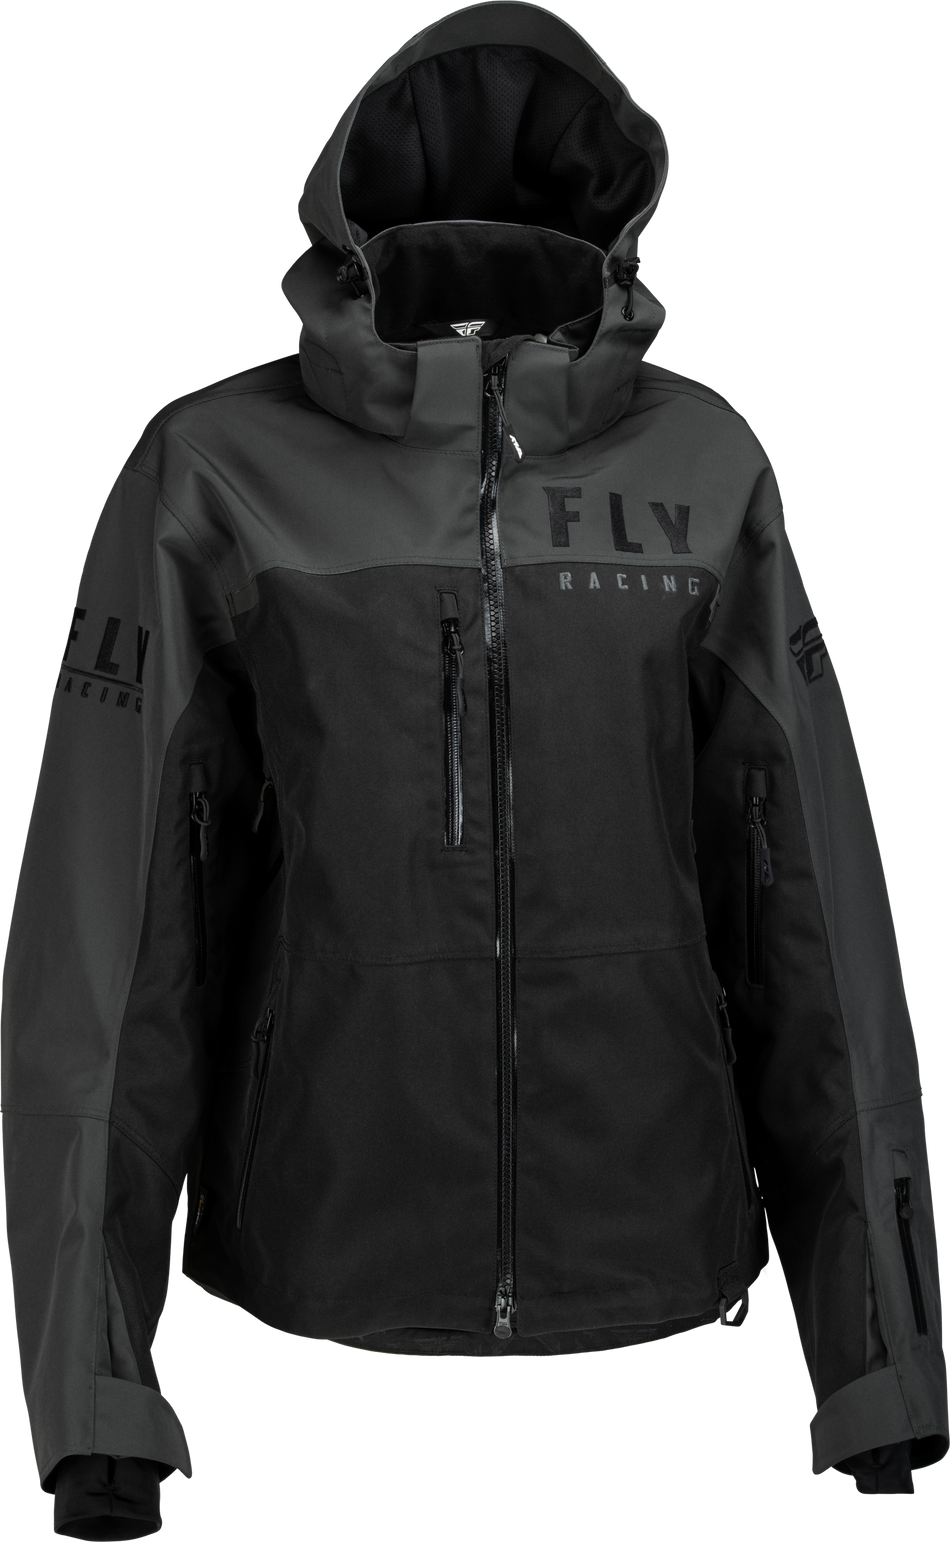 FLY RACING Women's Carbon Jacket Black/Grey Md 470-4500M